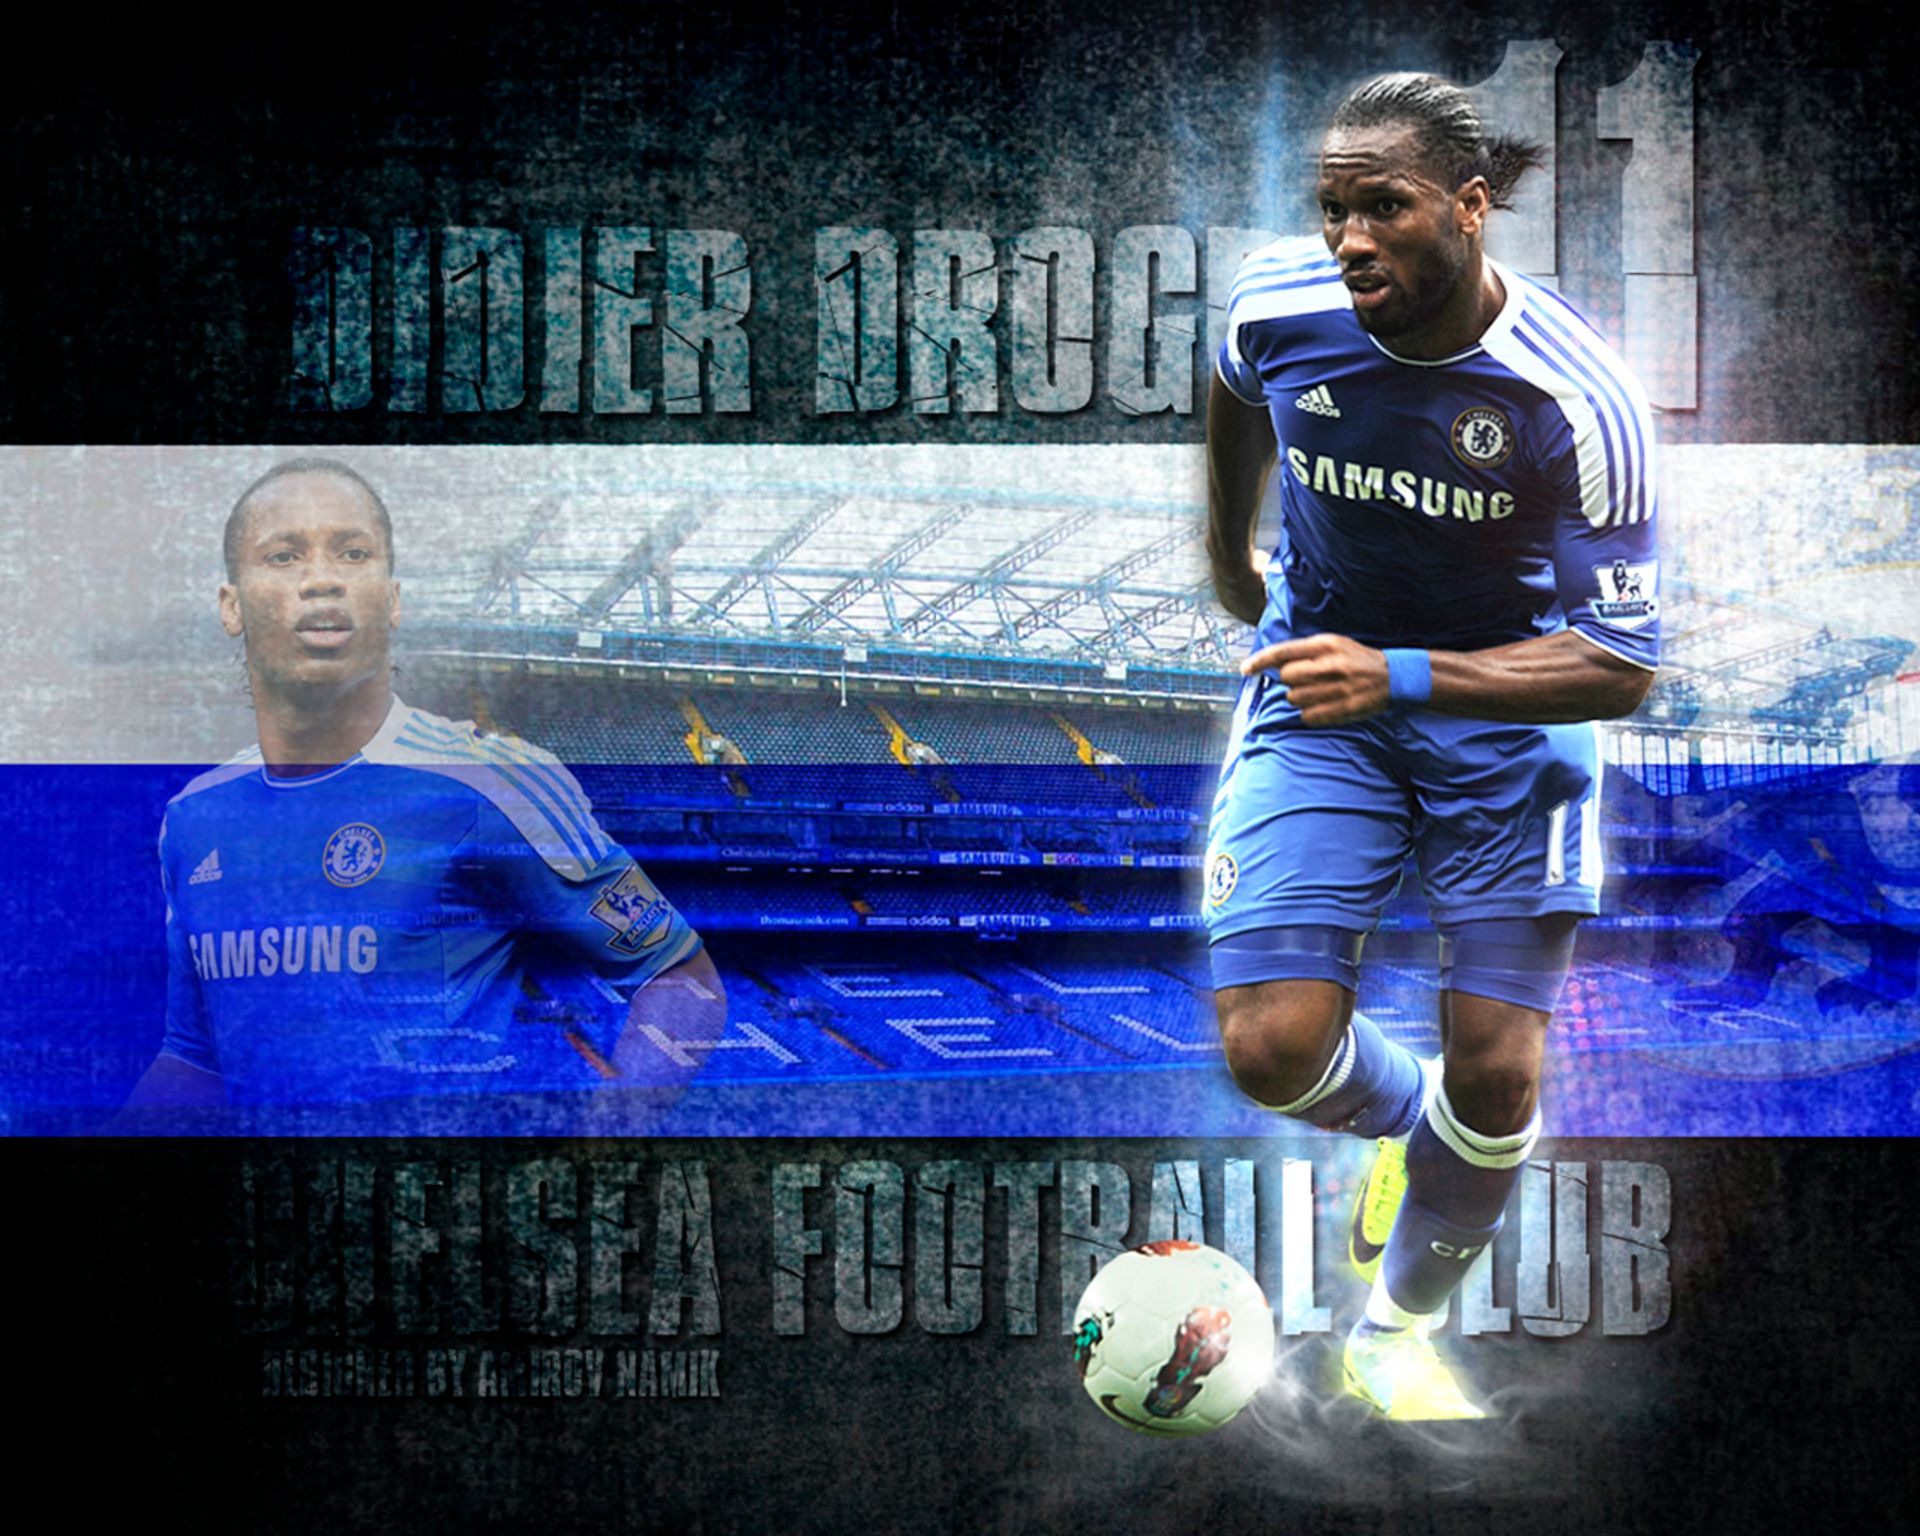 Download wallpaper chelsea, drogba, didier, didier drogba, section sports  in resolution 824x1464